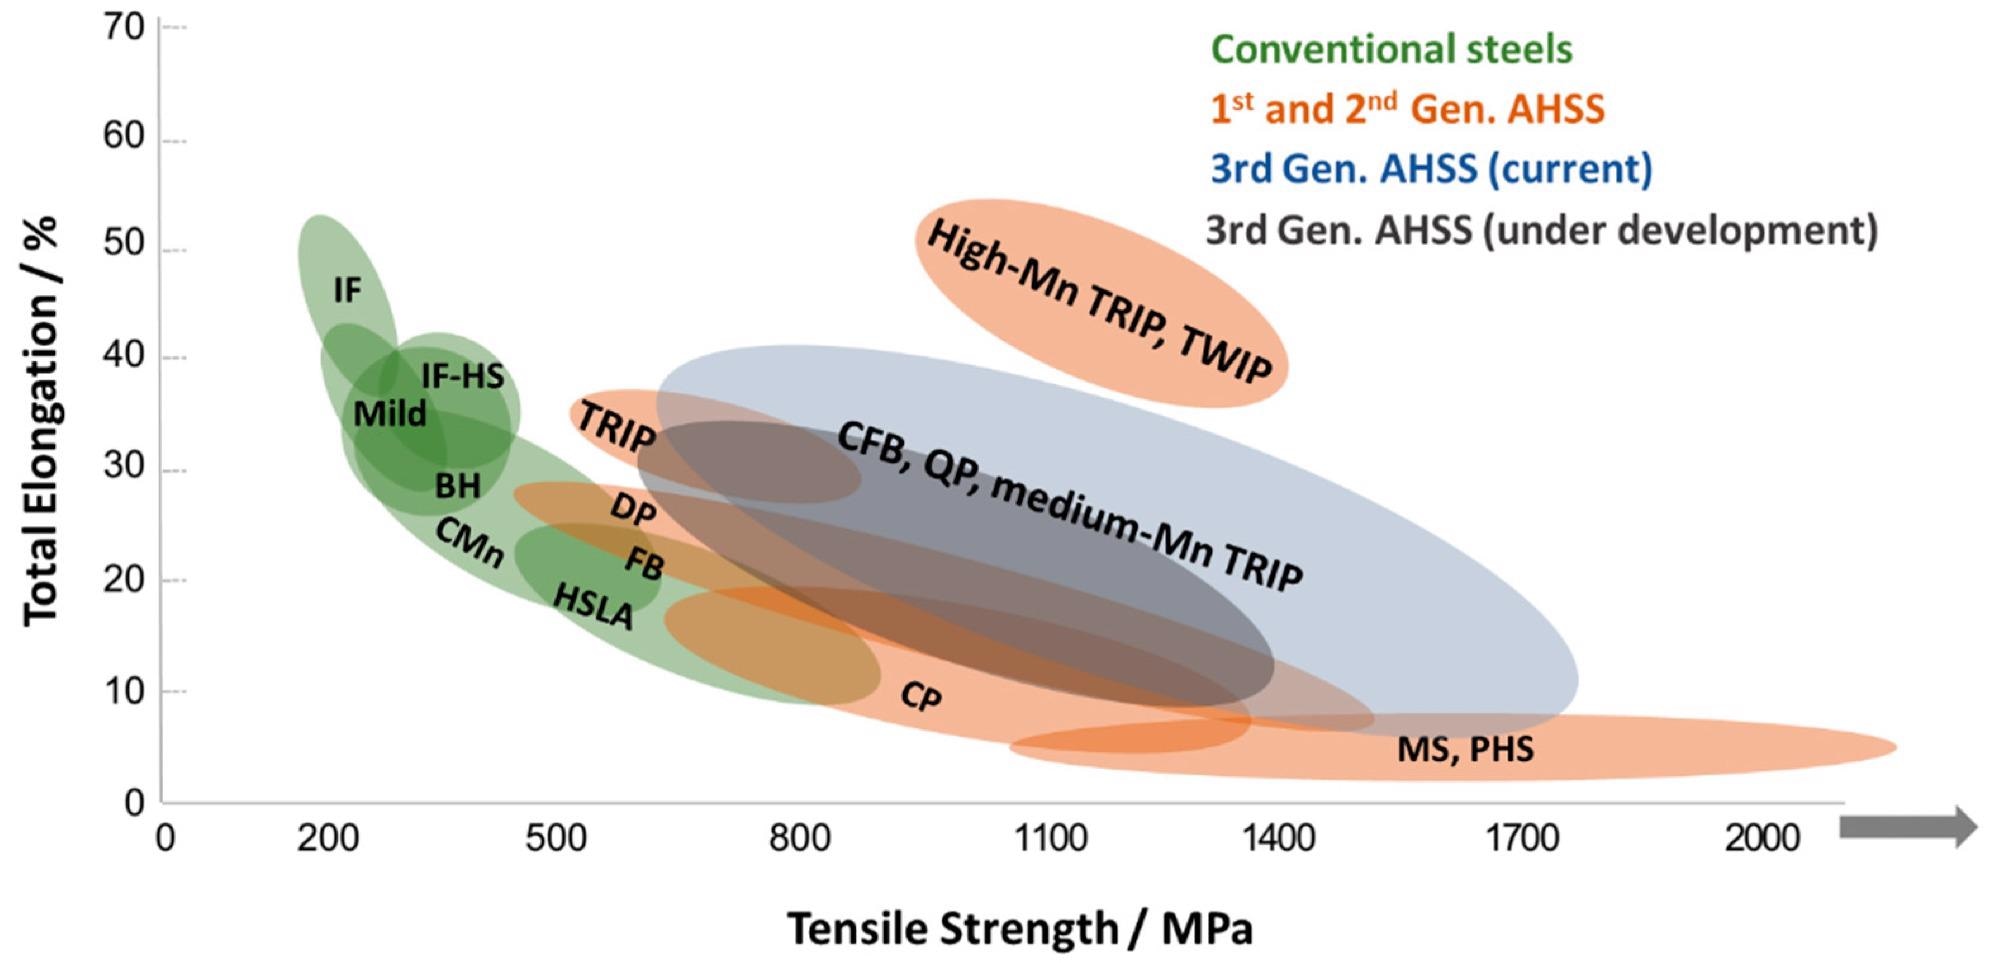 Figure 2 Mechanical performance of conventional steels and AHSS, adapted from [35,36,37].